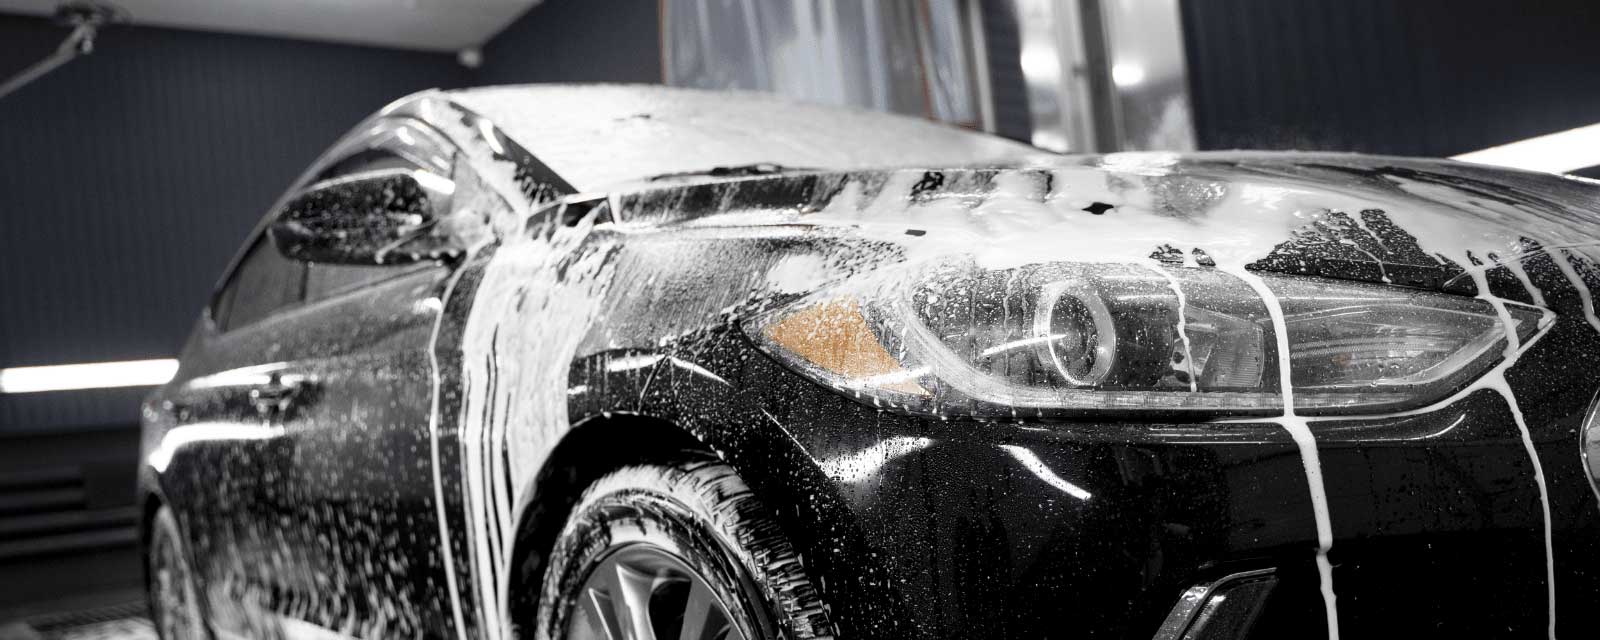 Ceramic Paint Protection Gold Coast - Ceramic Coating - Attention